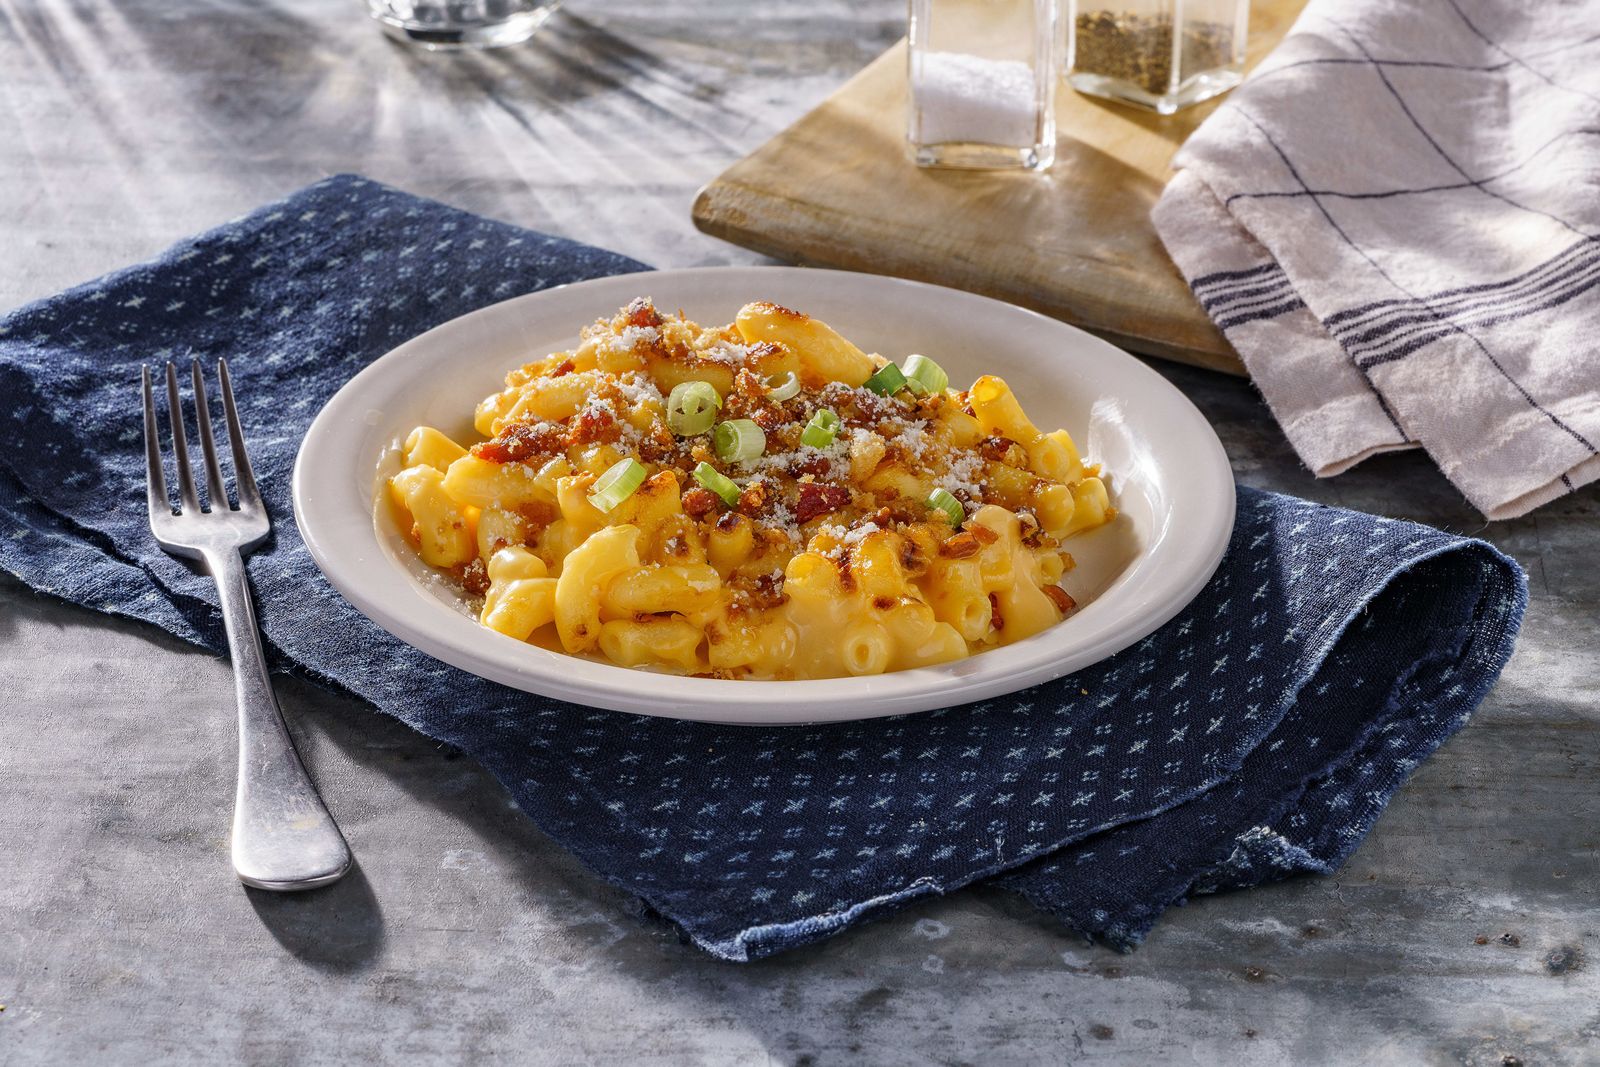 Cracker Barrel Old Country Store Bacon Mac n' Cheese